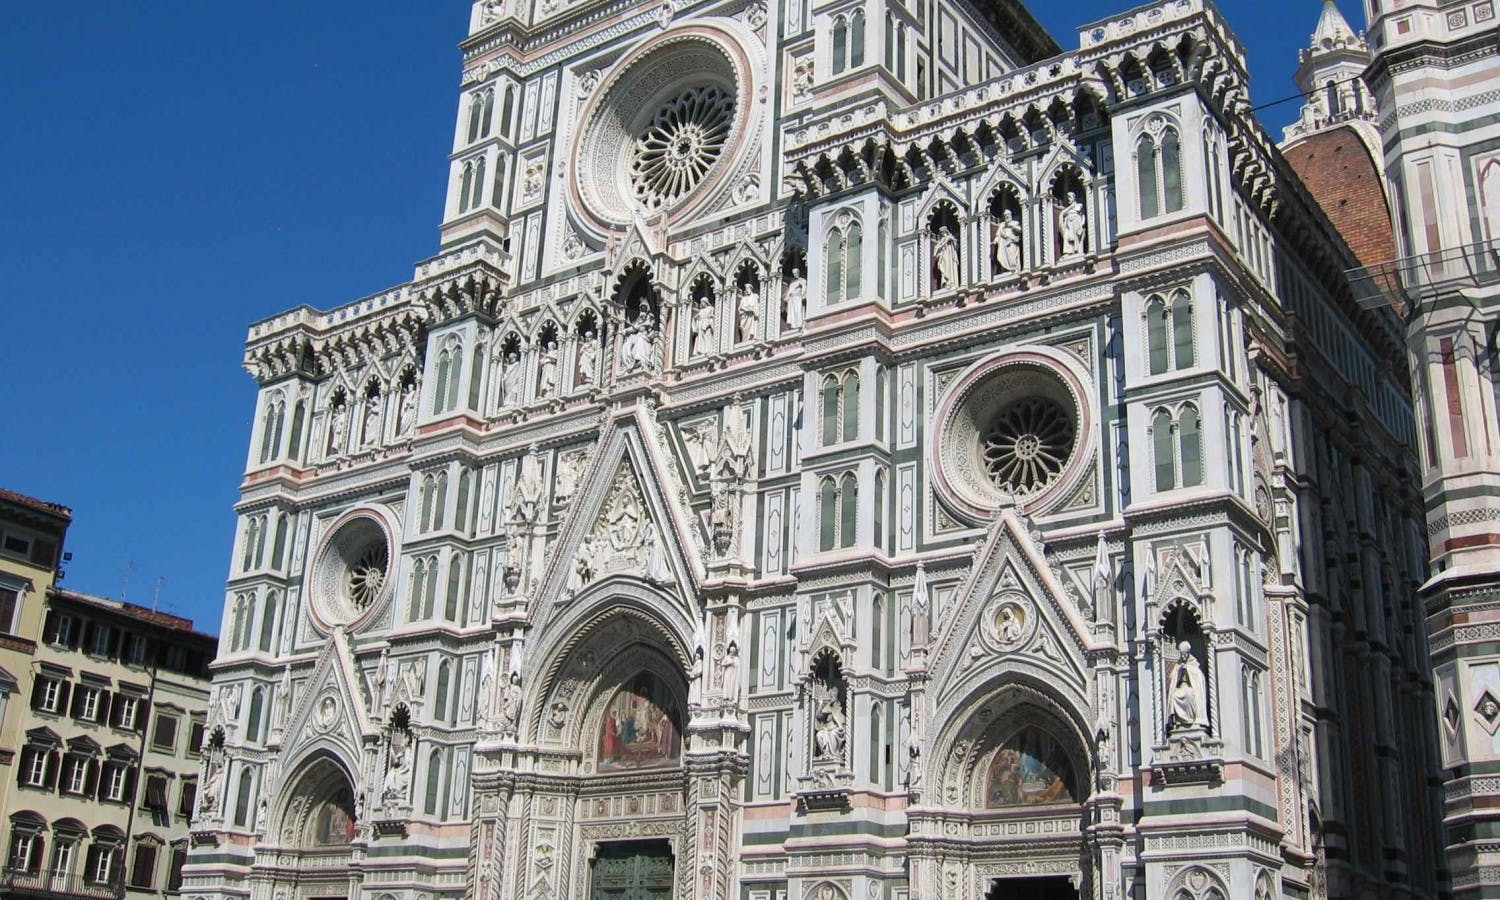 Best of Florence Morning Tour with Uffizi and Accademia Gallery: Skip the Line Tickets and Guided Visit